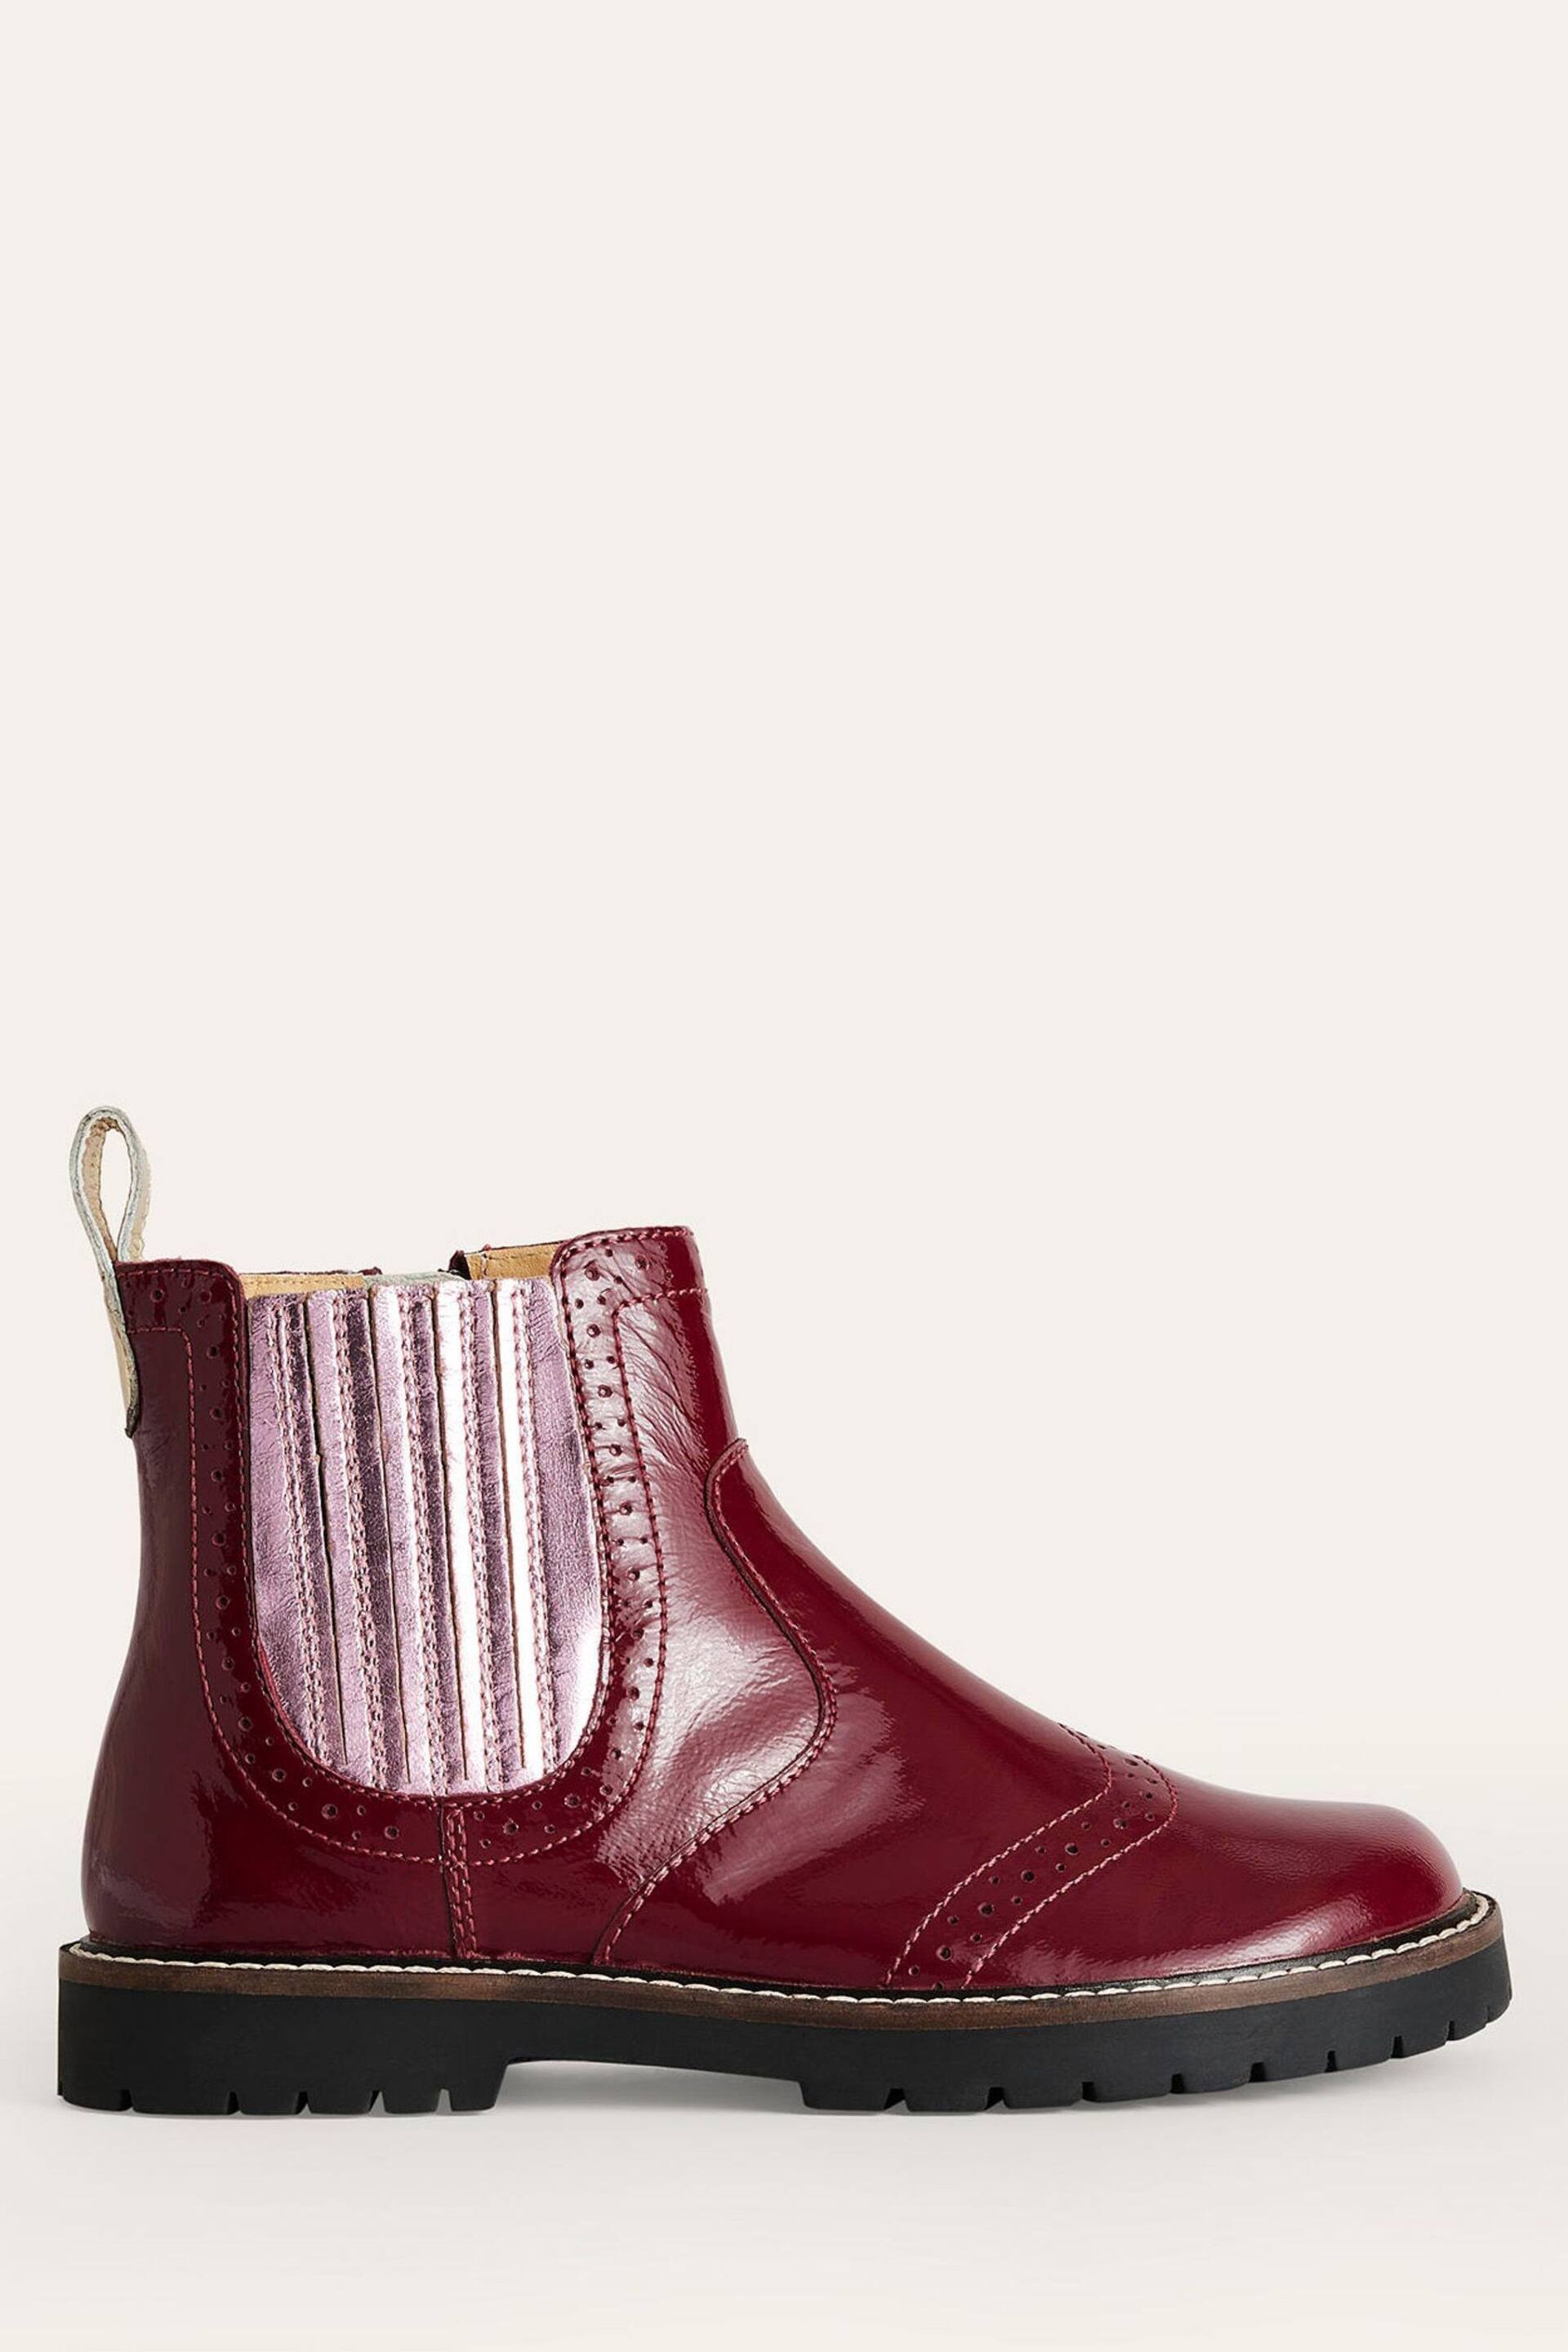 Boden Red Leather Chelsea Boots - Image 1 of 4